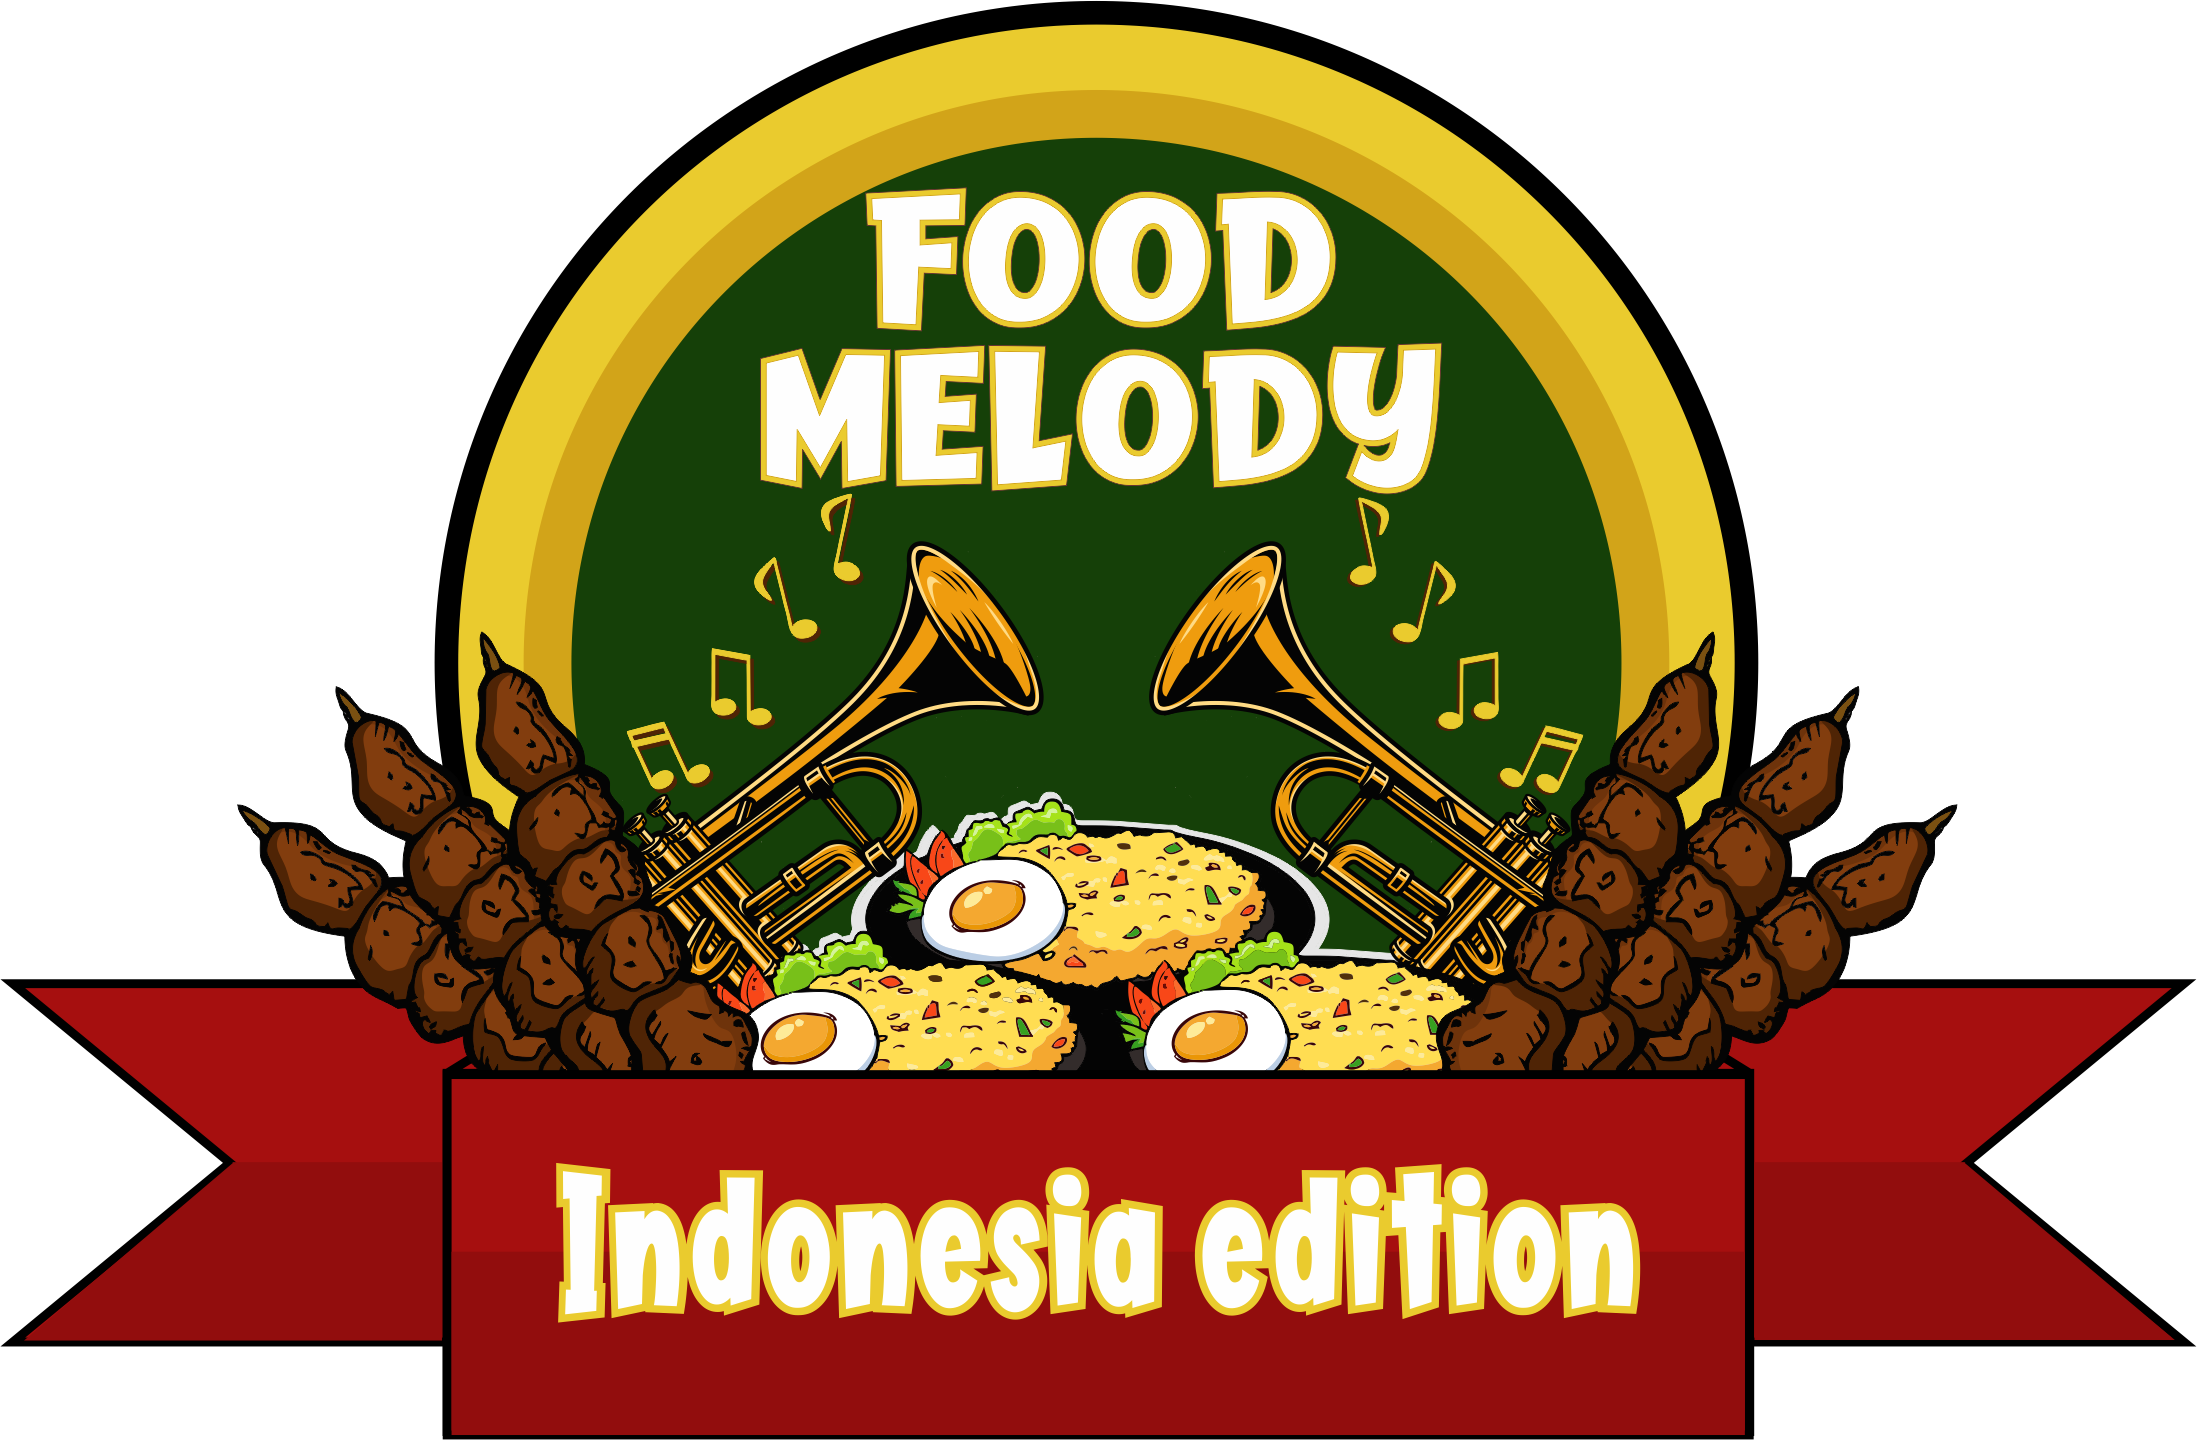 Food Melody: "Indonesian Edition"